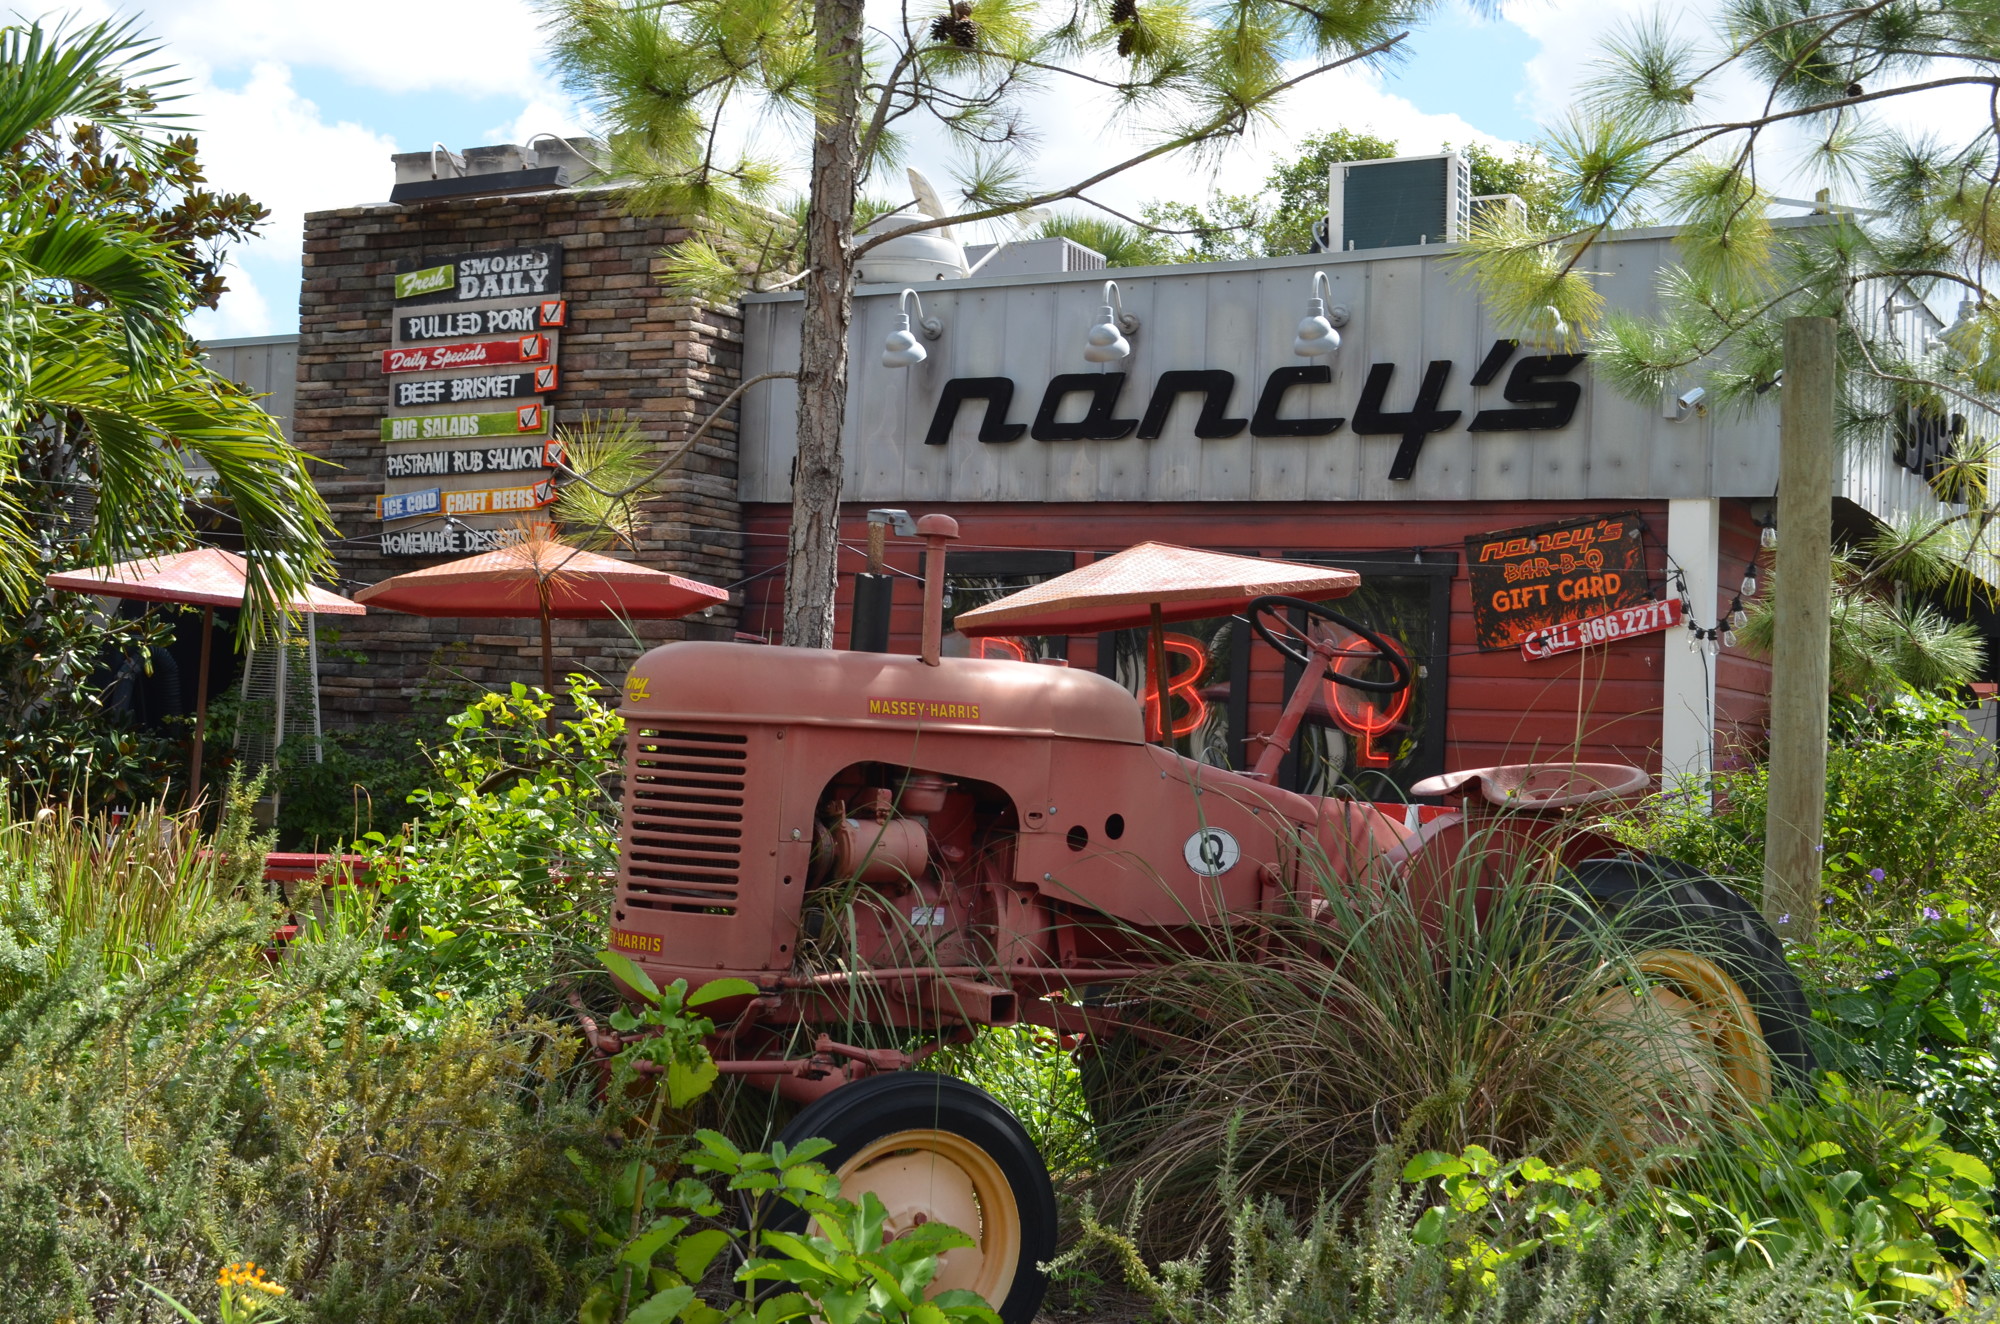 Nancy's BBQ on Pineapple Avenue incorporates farm equipment into the rural-themed landscape. The design allows for outside seating for patrons to take in the patch of greenery the middle of Downtown Sarasota.